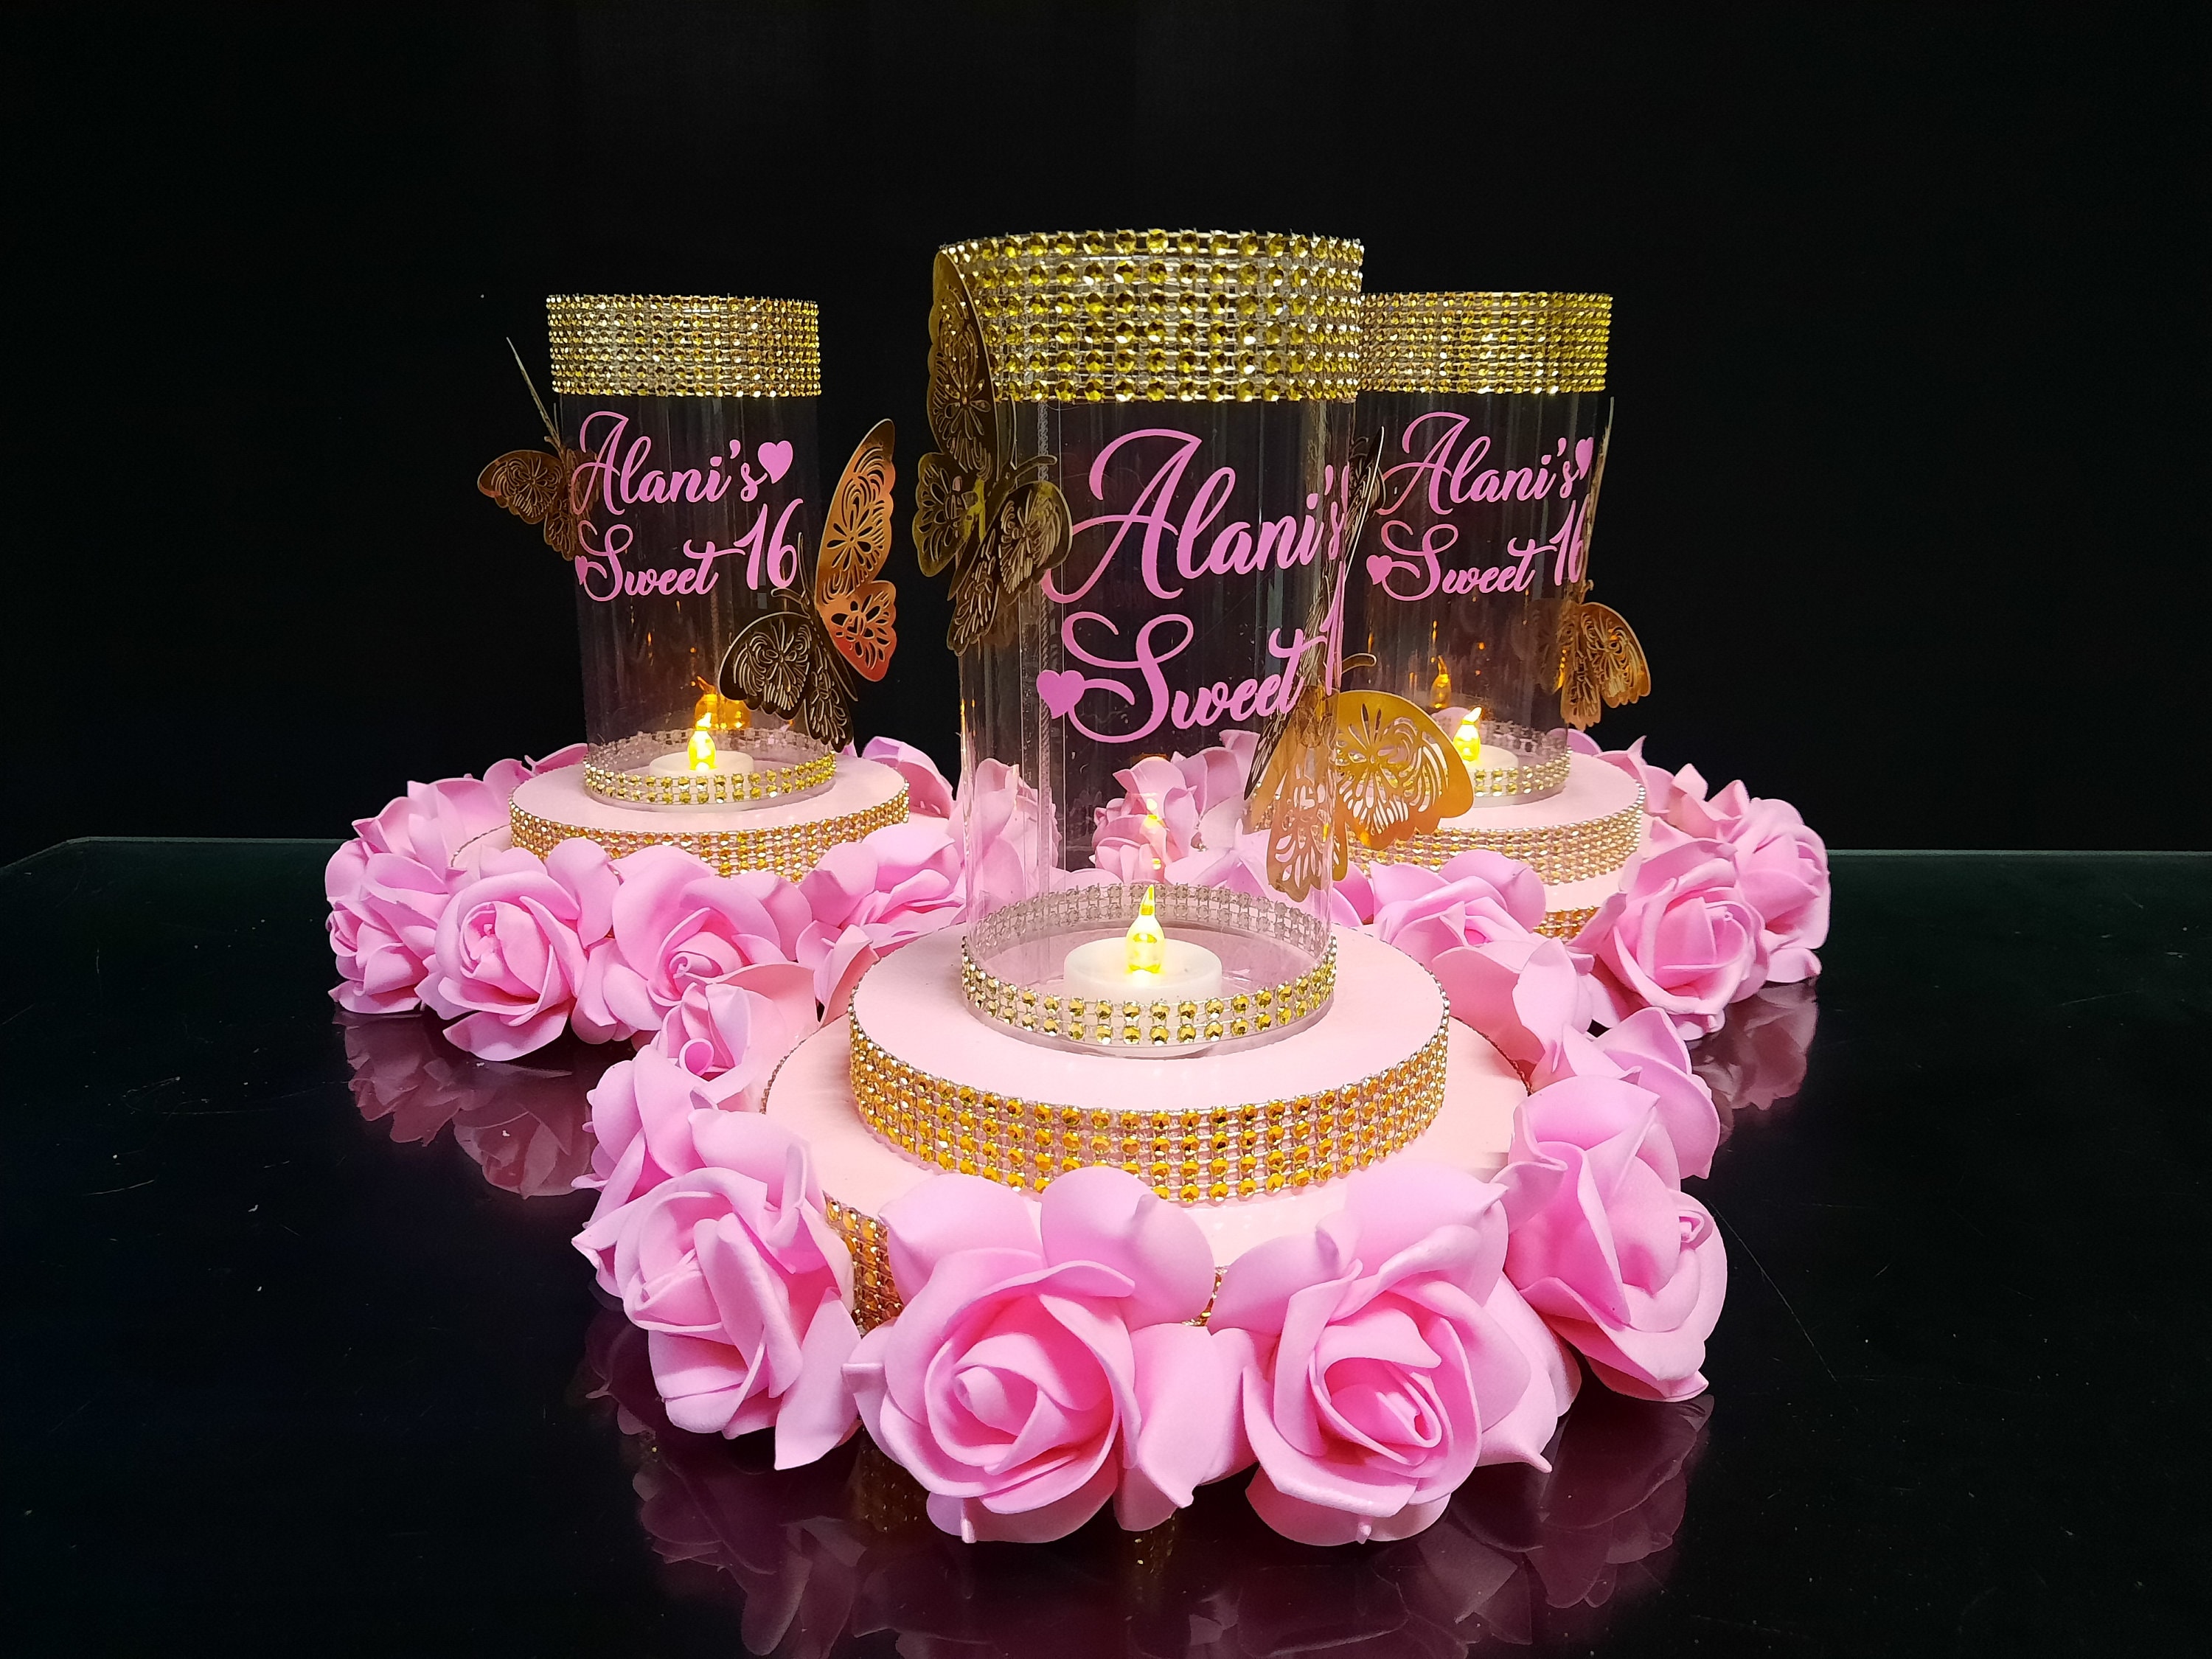 Table decoration for Quinceañeras or weddings  Quinceanera centerpieces, Quinceanera  decorations, Quince decorations